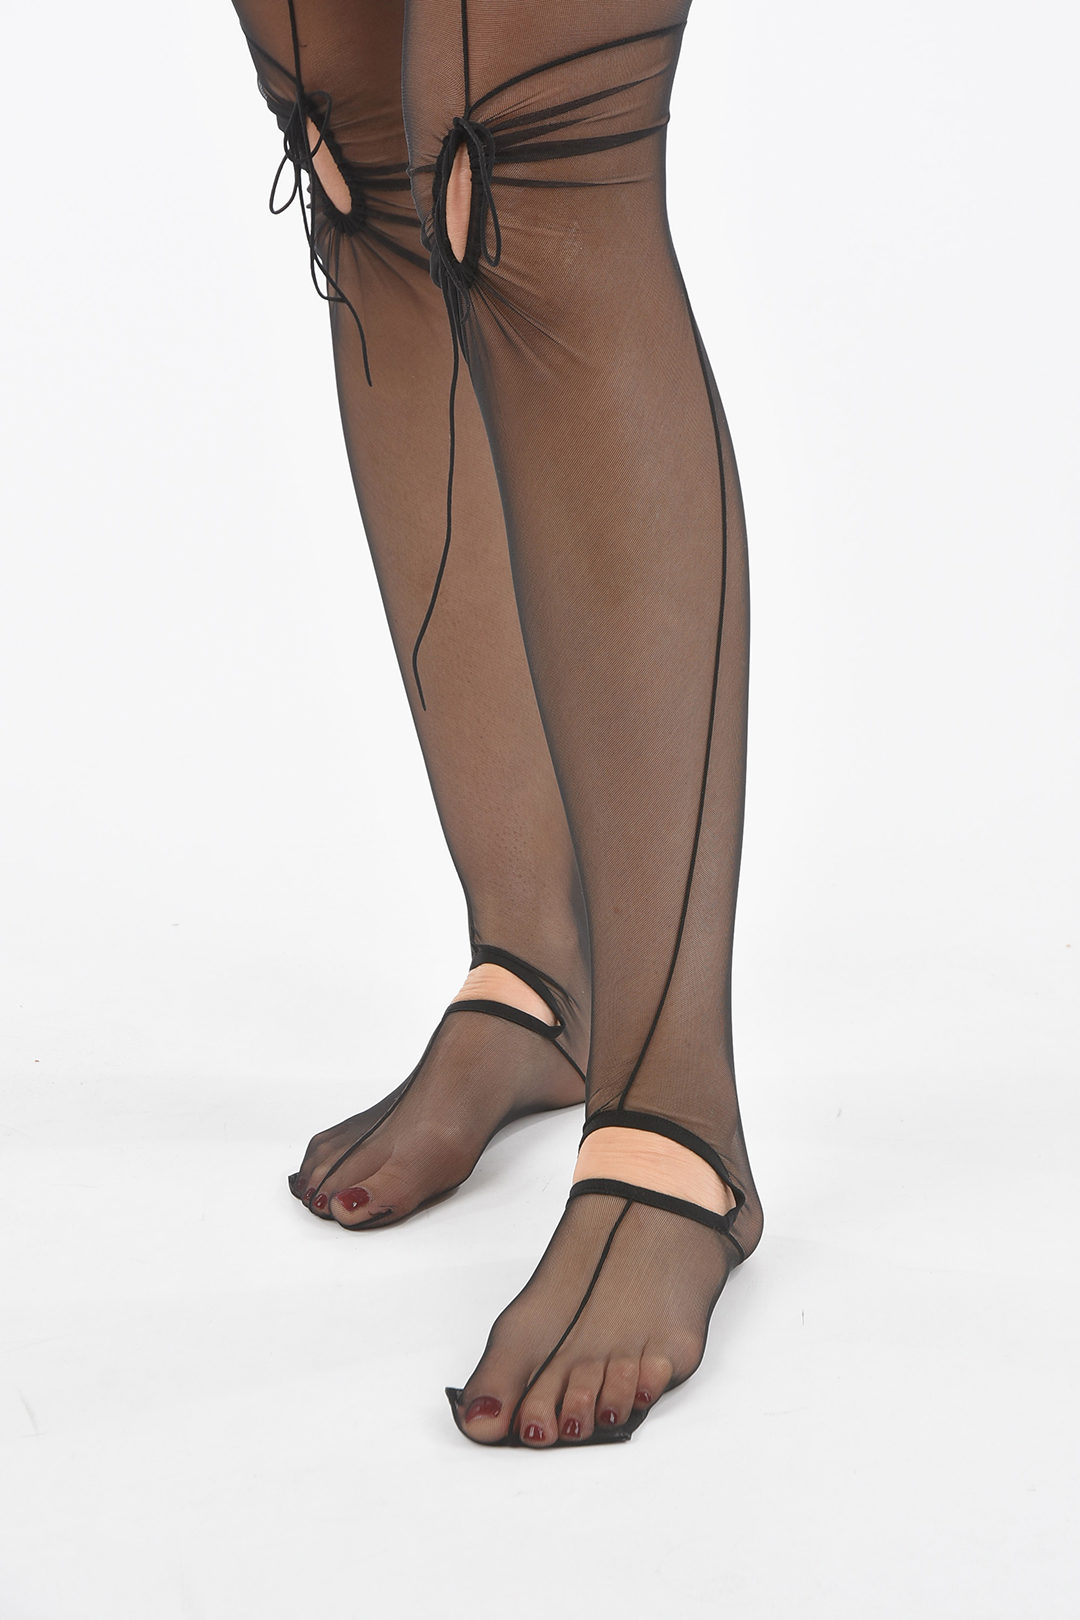 Nensi Dojaka Stretch Tulle High-wasited Tights Embellished with